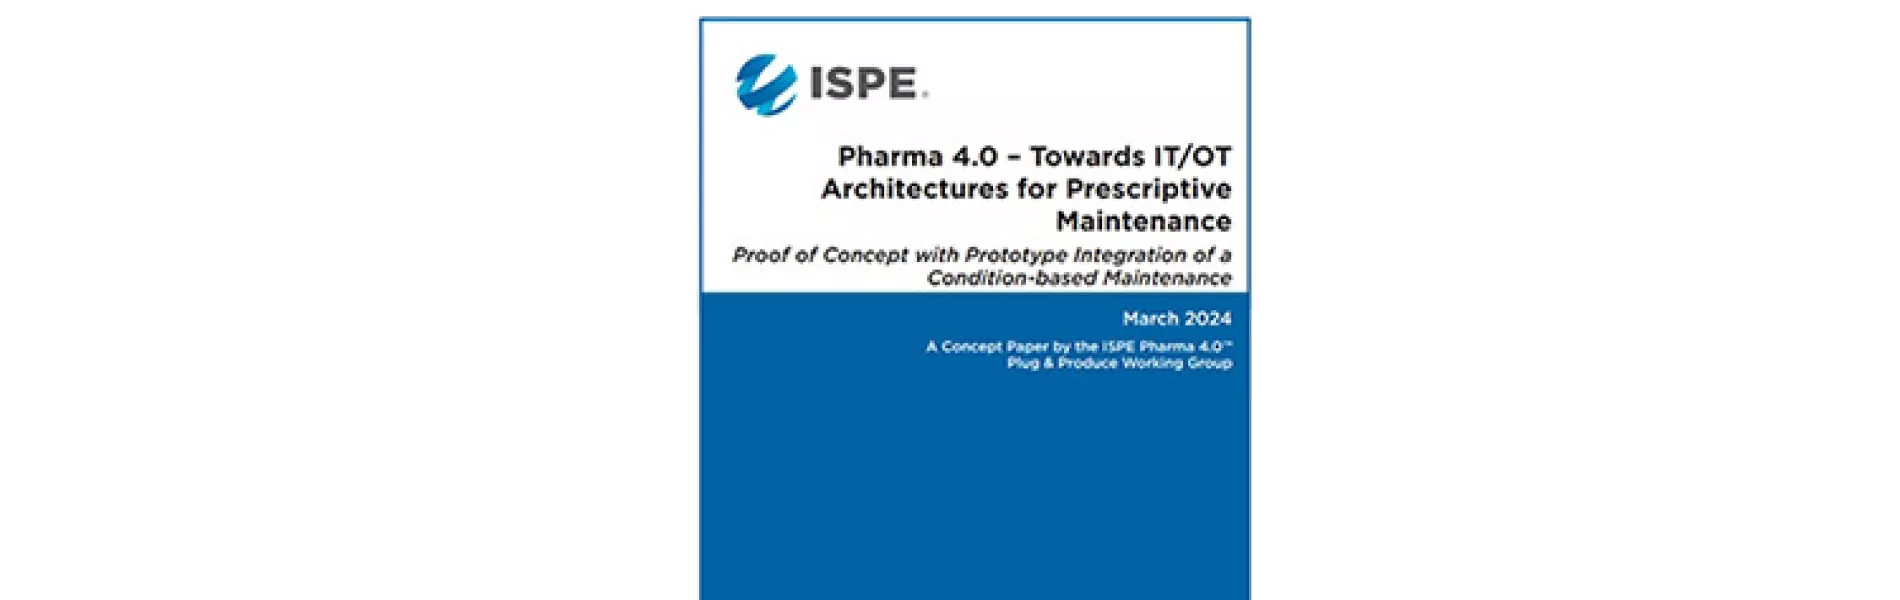 Pharma 4.0™ Plug and Produce Working Group Publishes Concept Papers